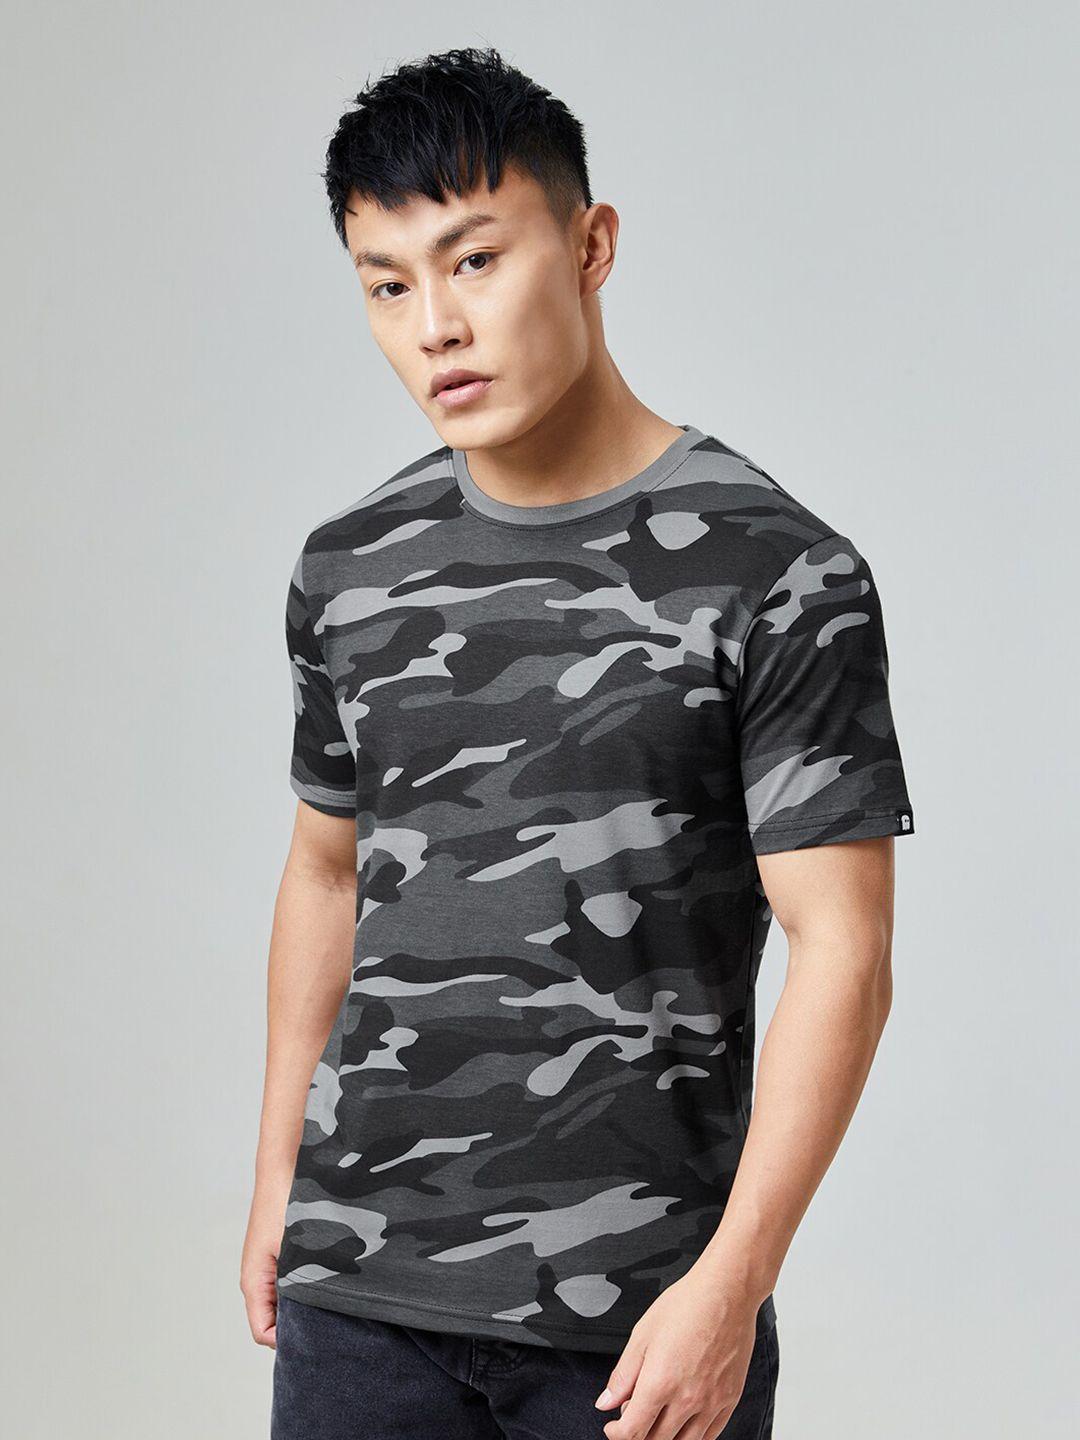 the souled store men grey camouflage printed t-shirt